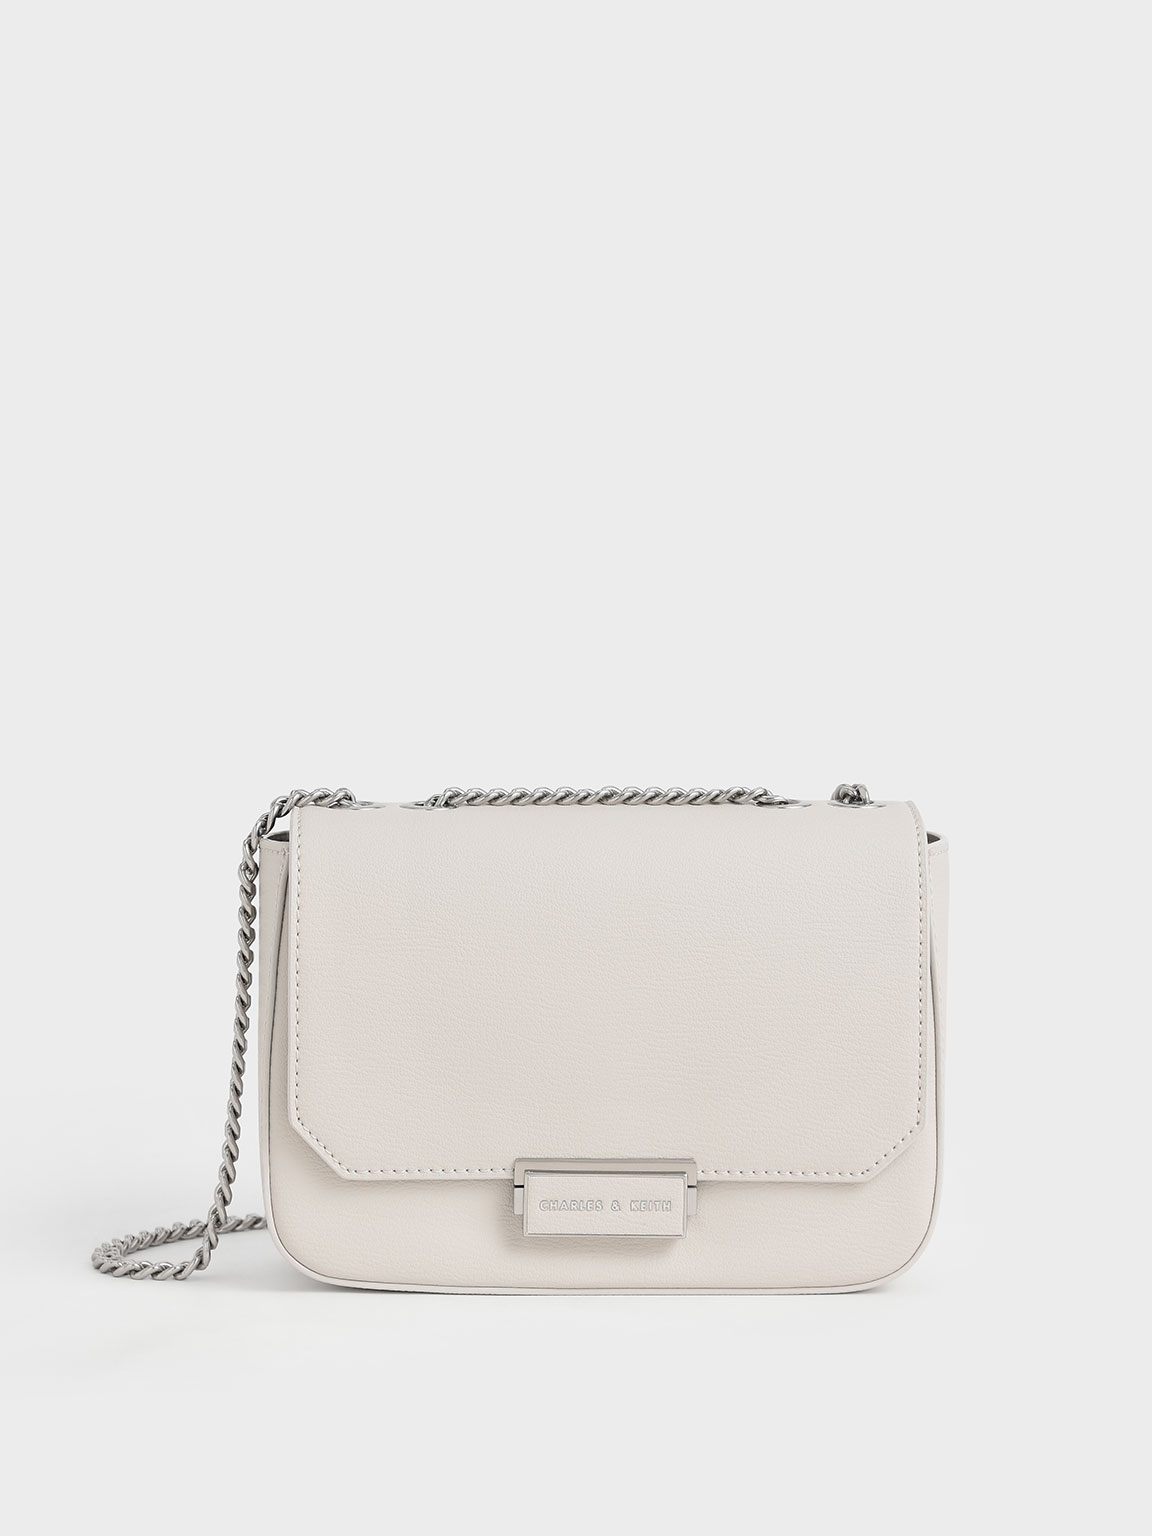 Must-Have Bags  Chain Straps & Ruched Handles - CHARLES & KEITH EU